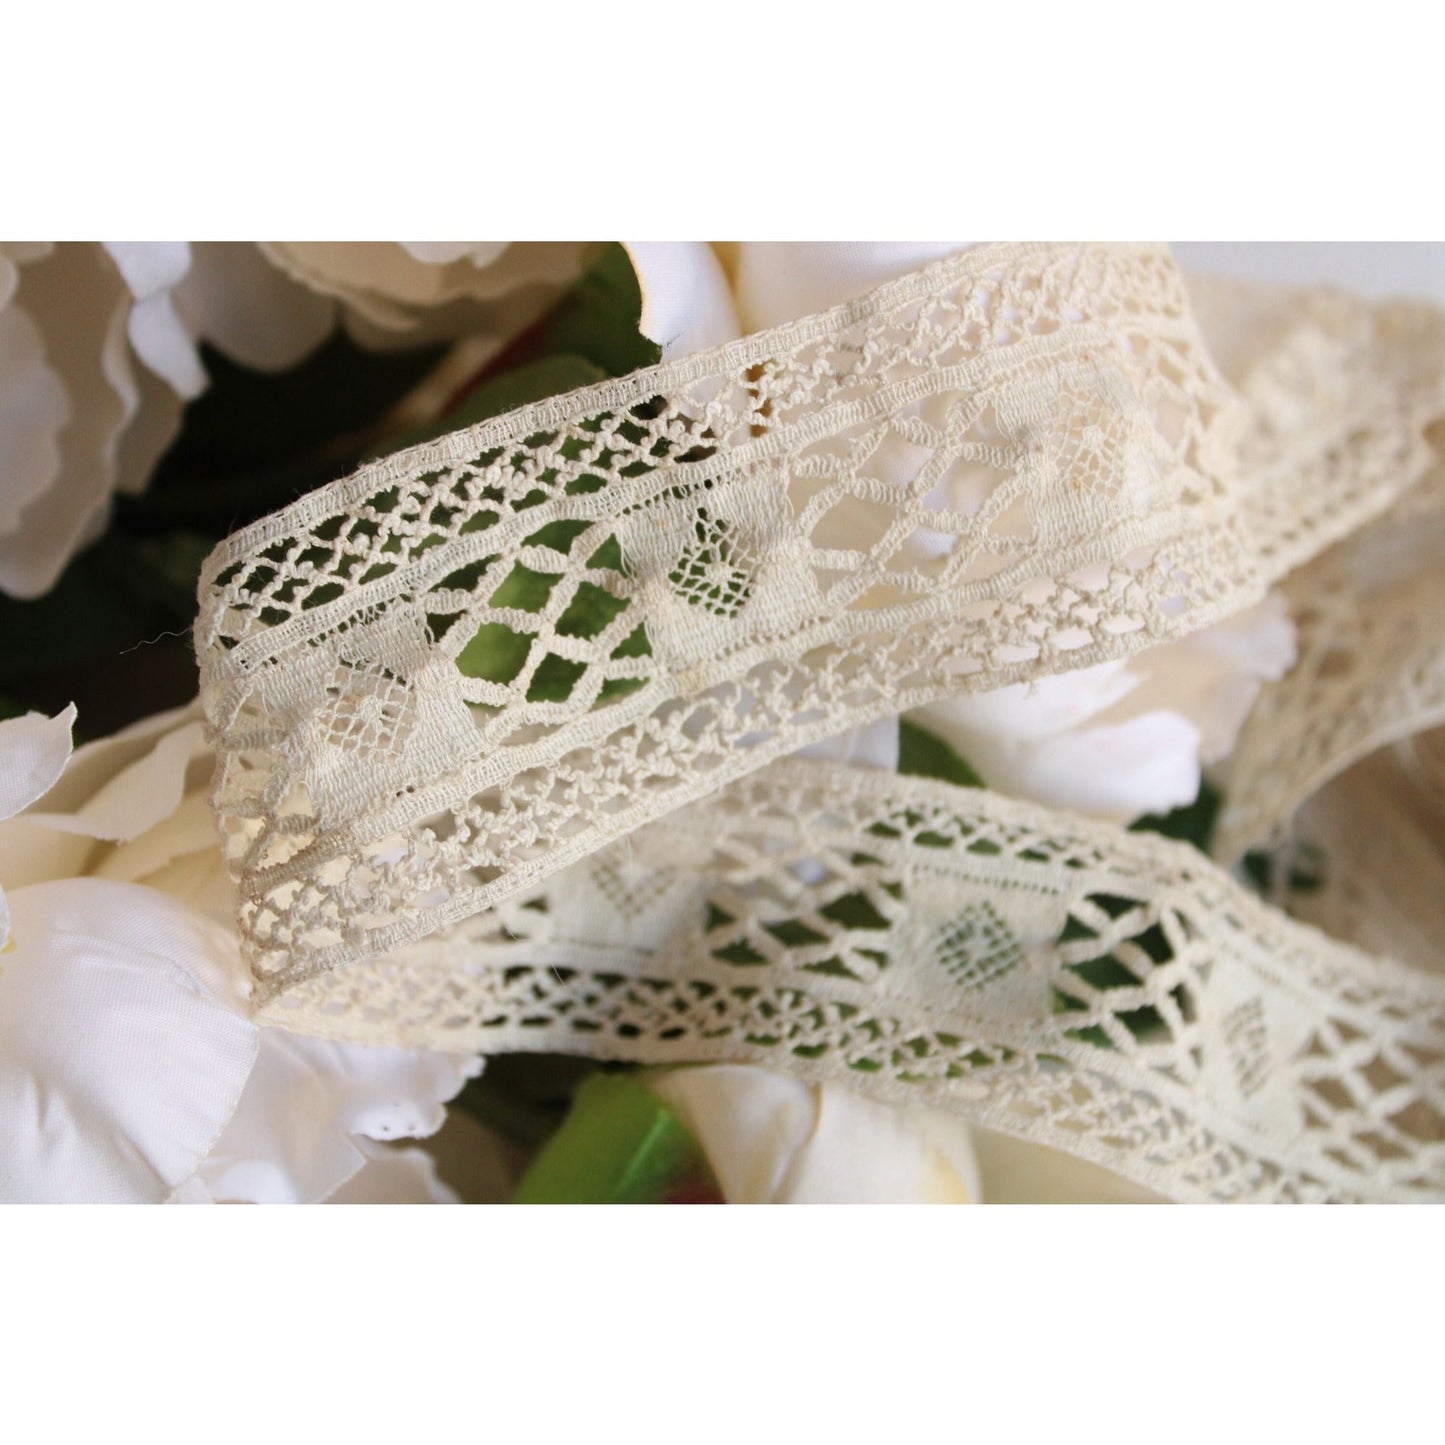 Vintage Antique Victorian Lace Trim ,Ivory Crochet Lace ,41" Long, 1.5" Wide ,Altered Art Sewing Crafting Costume Edwardian